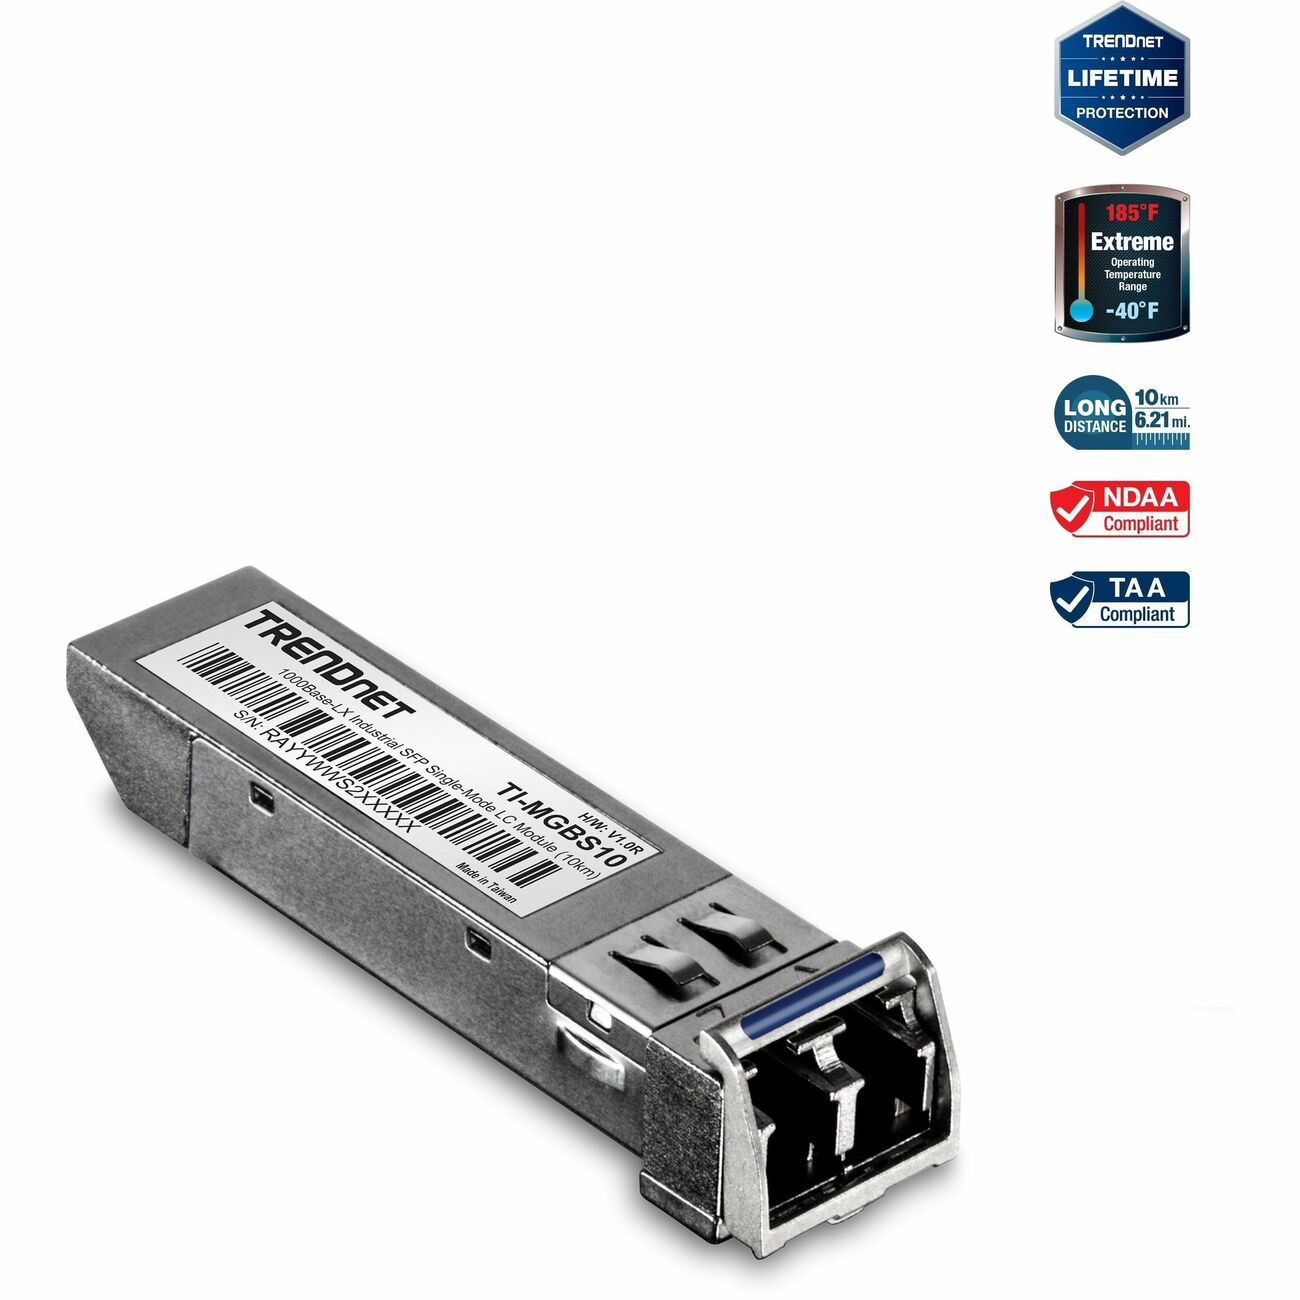 TRENDnet SFP to RJ45 Industrial Single-Mode LC Module (10km), TI-MGBS10,  1000Base-LX Industrial SFP, Compliant with IEEE 802.3z Gigabit Ethernet,  Data Rates of up to 1.25Gbps, Lifetime Protection